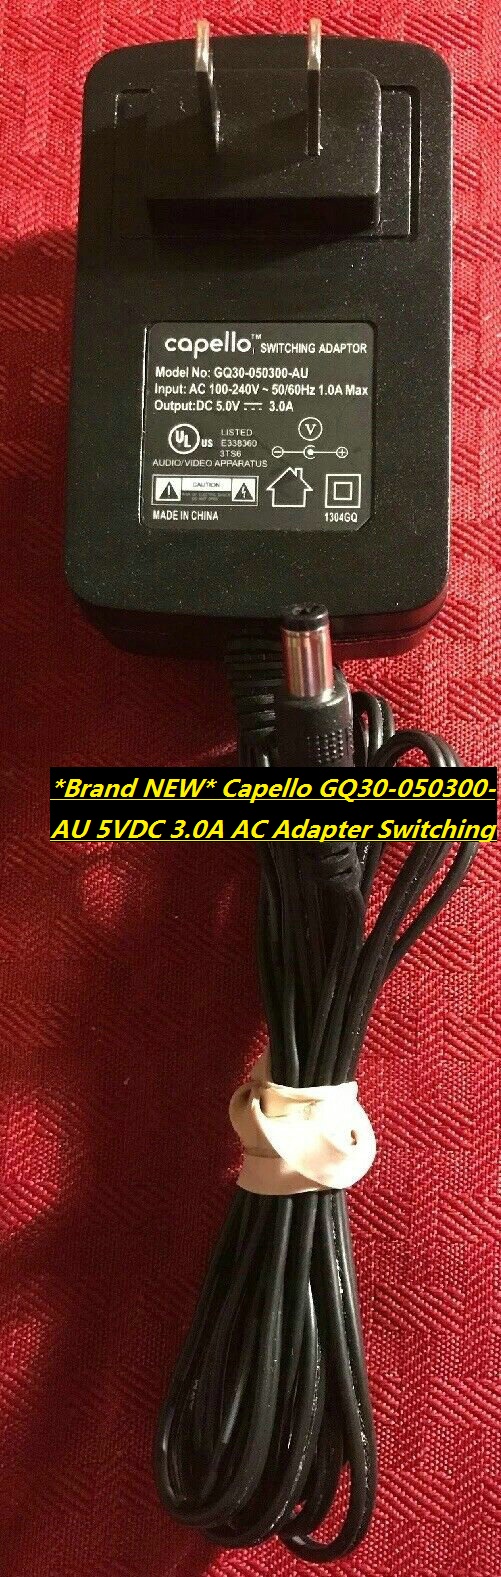 *Brand NEW* Capello GQ30-050300-AU 5VDC 3.0A AC Adapter Switching Power Supply